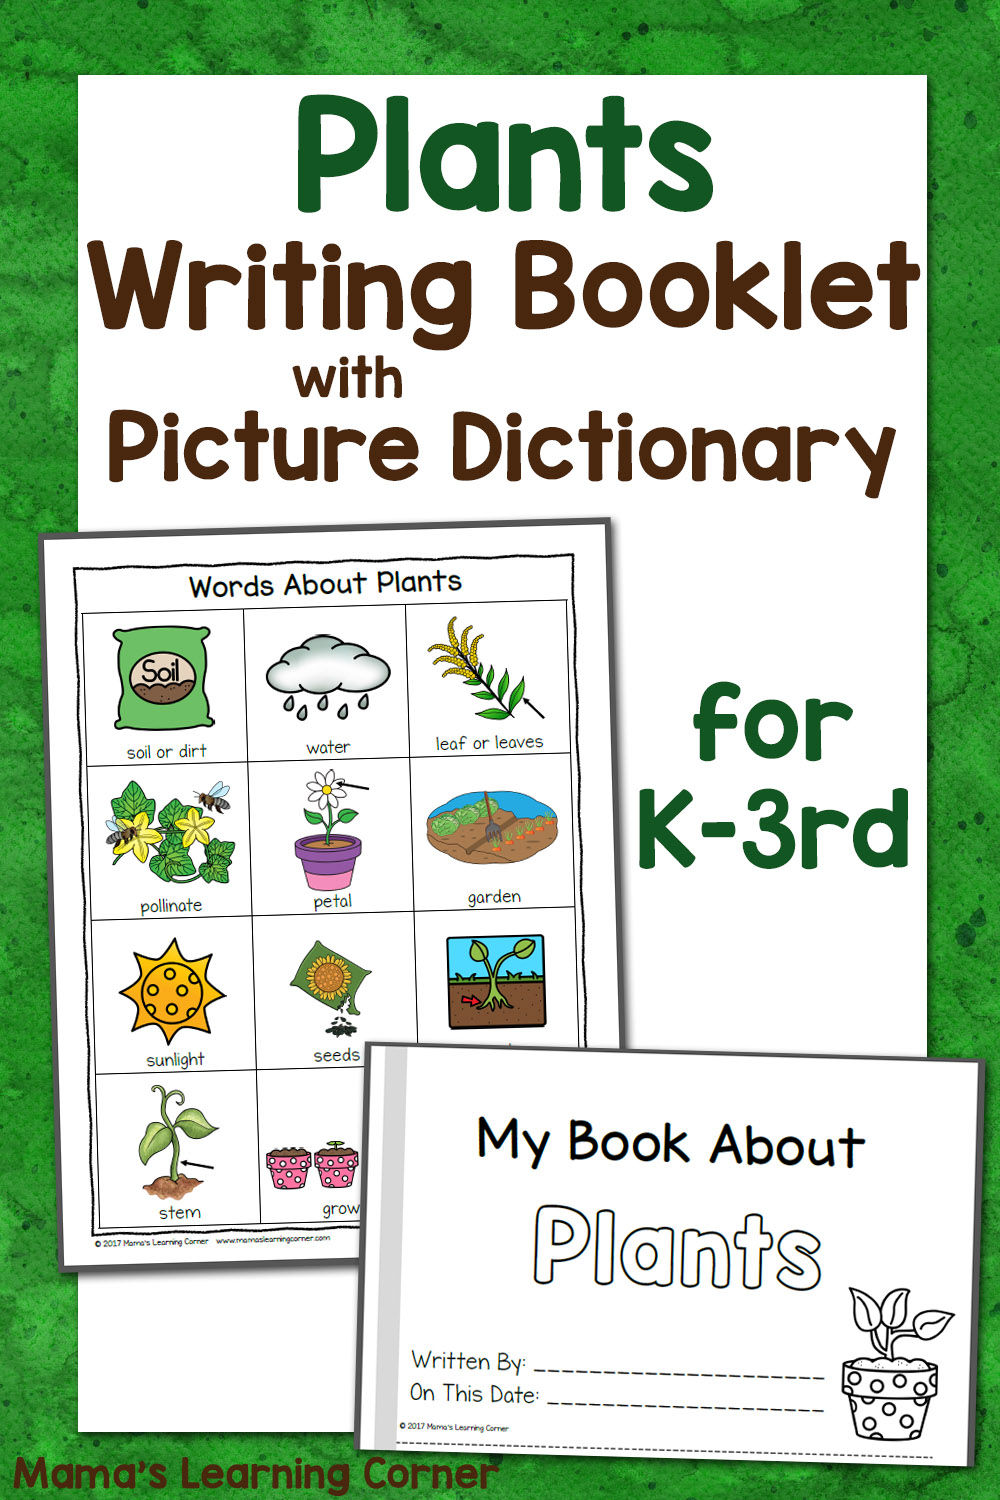 Plant Writing Booklet with Picture Dictionary